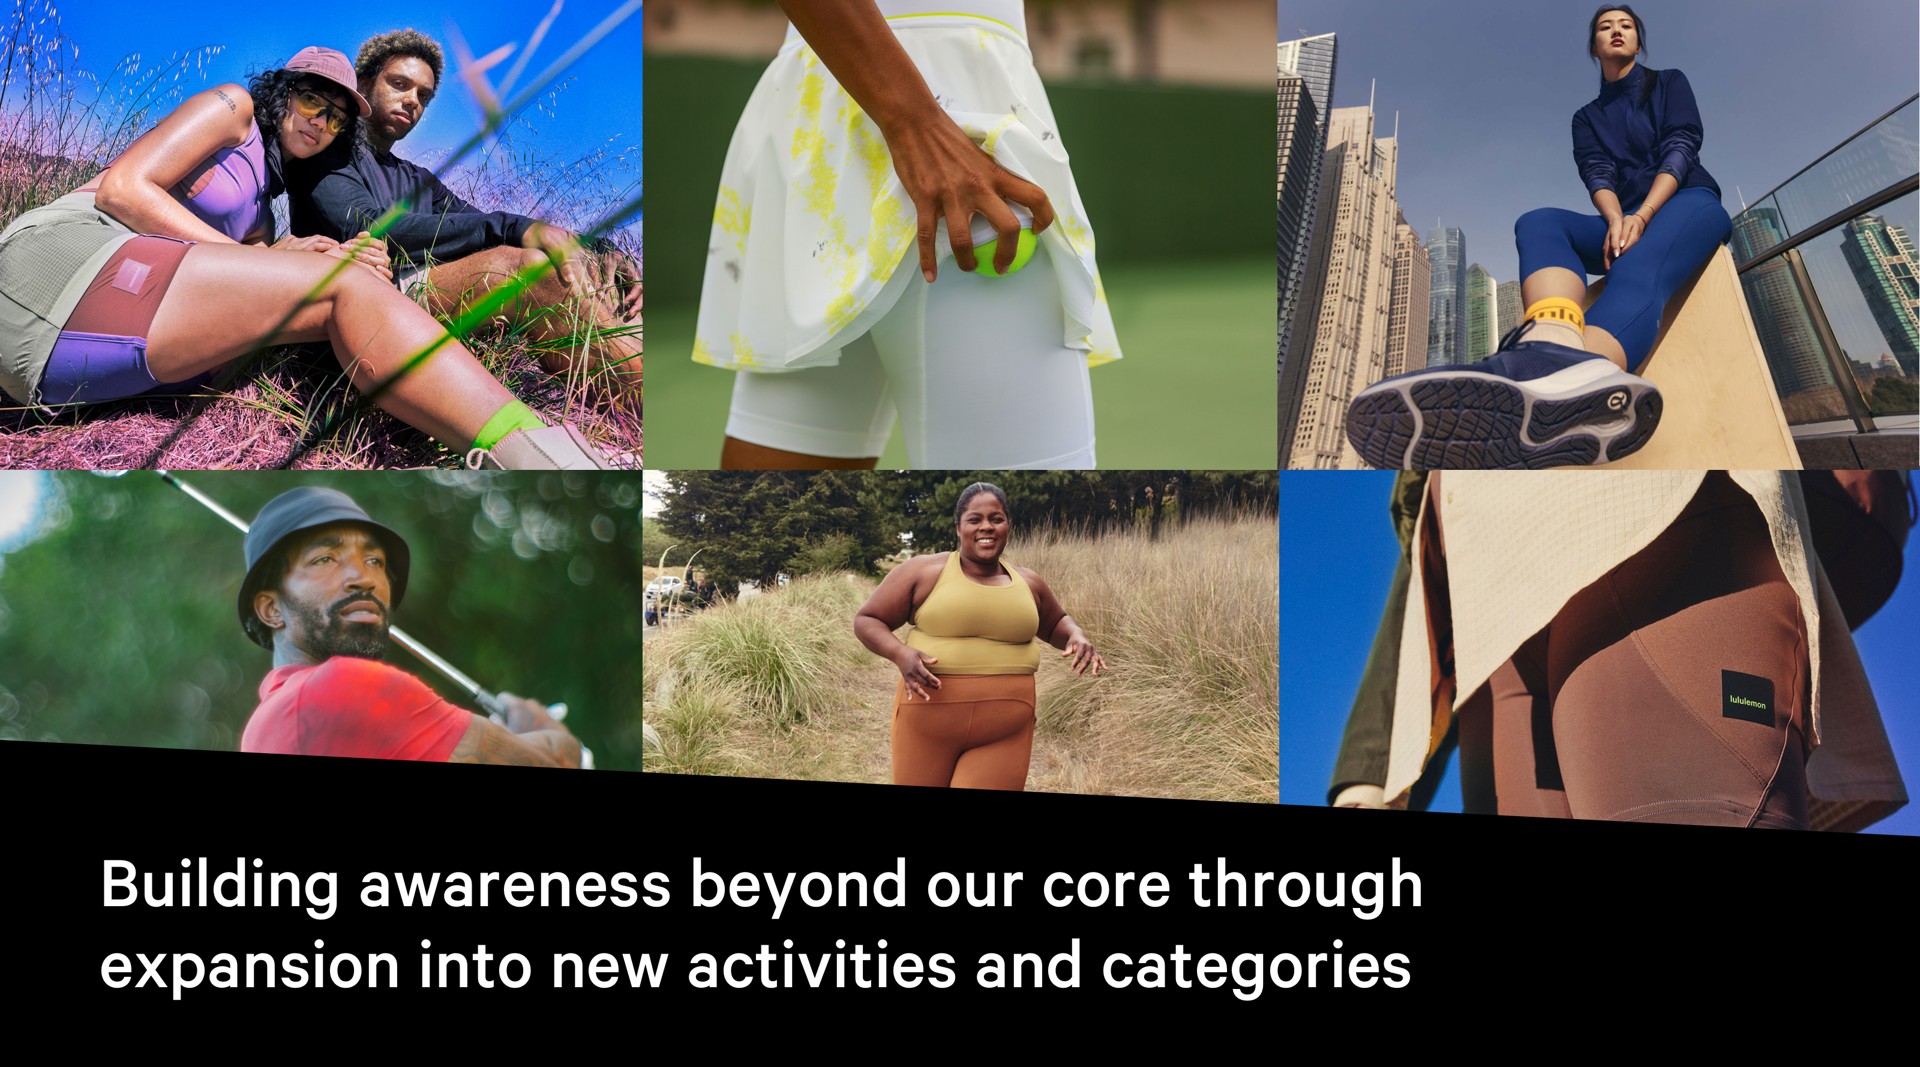 building awareness beyond our core through expansion into new activities and categories | Lululemon